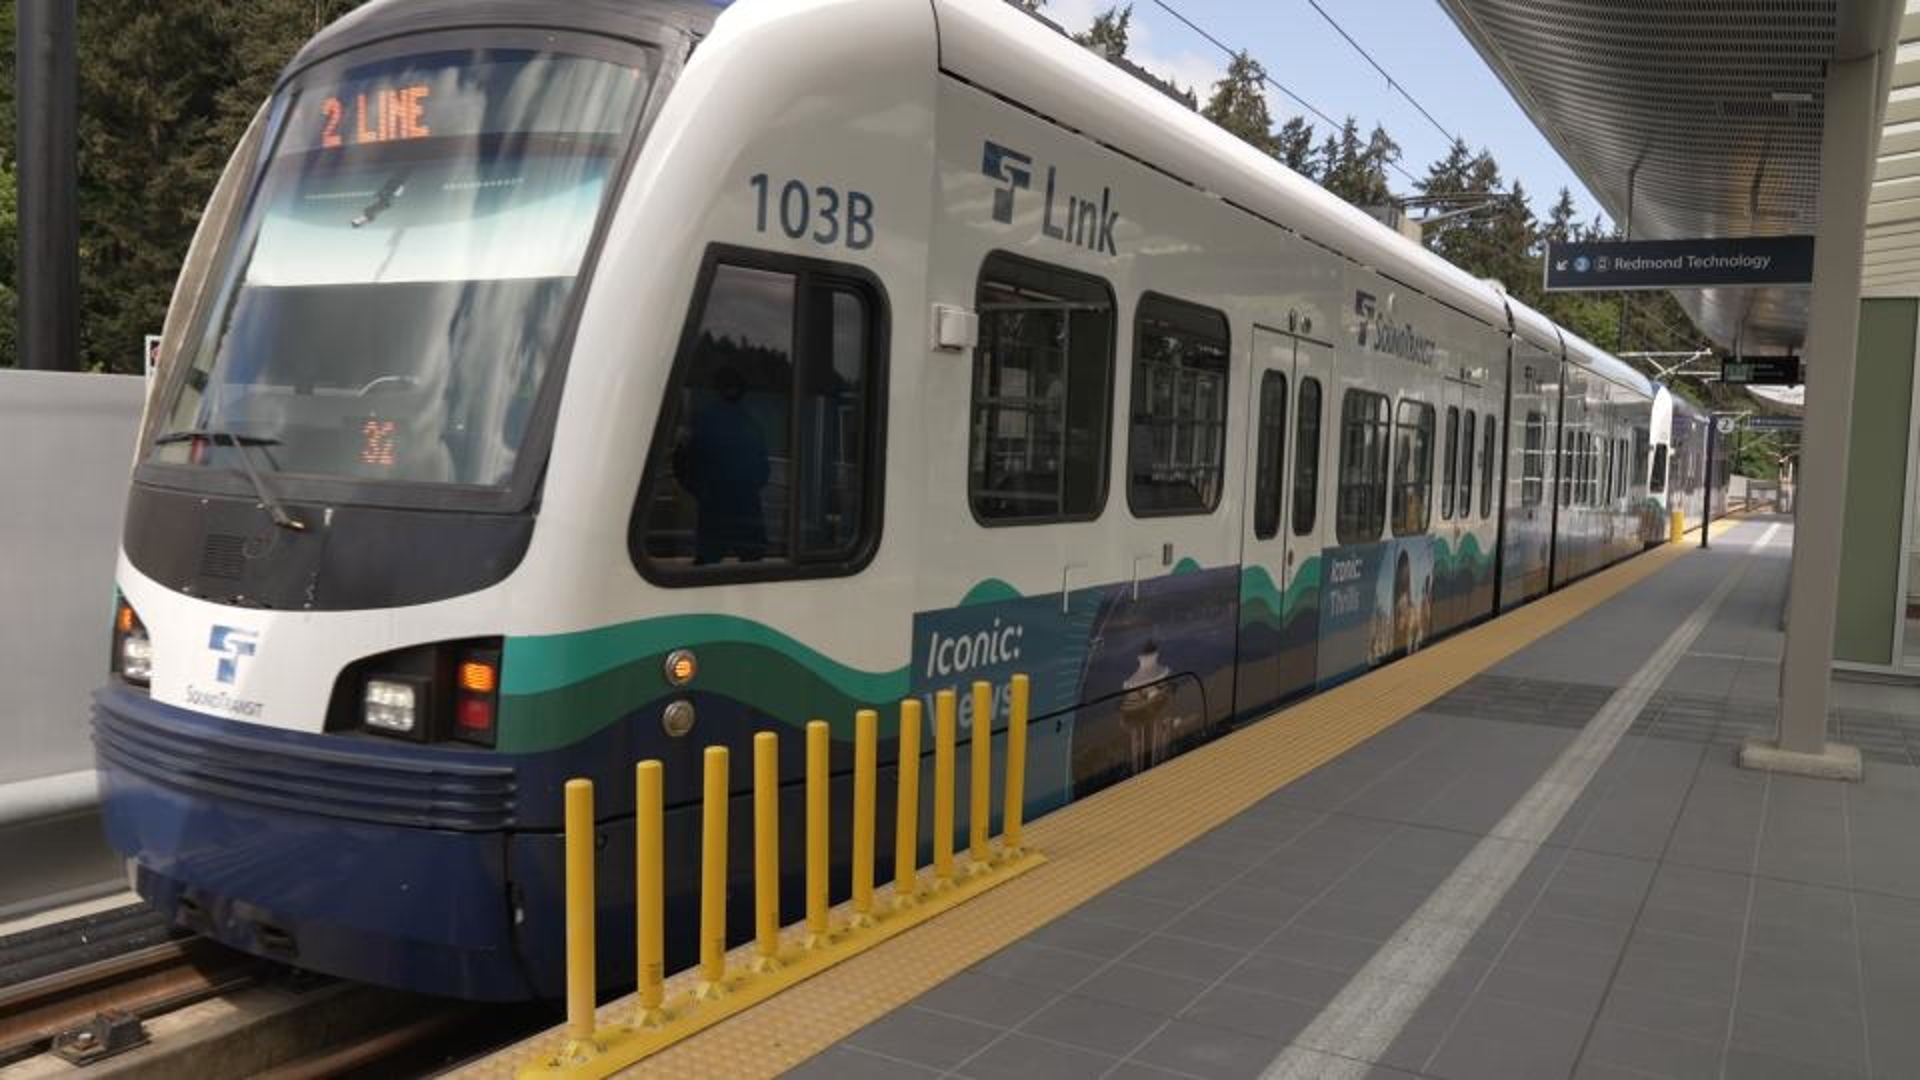 Sound Transit's new Link light rail connects two growing population centers. #k5evening